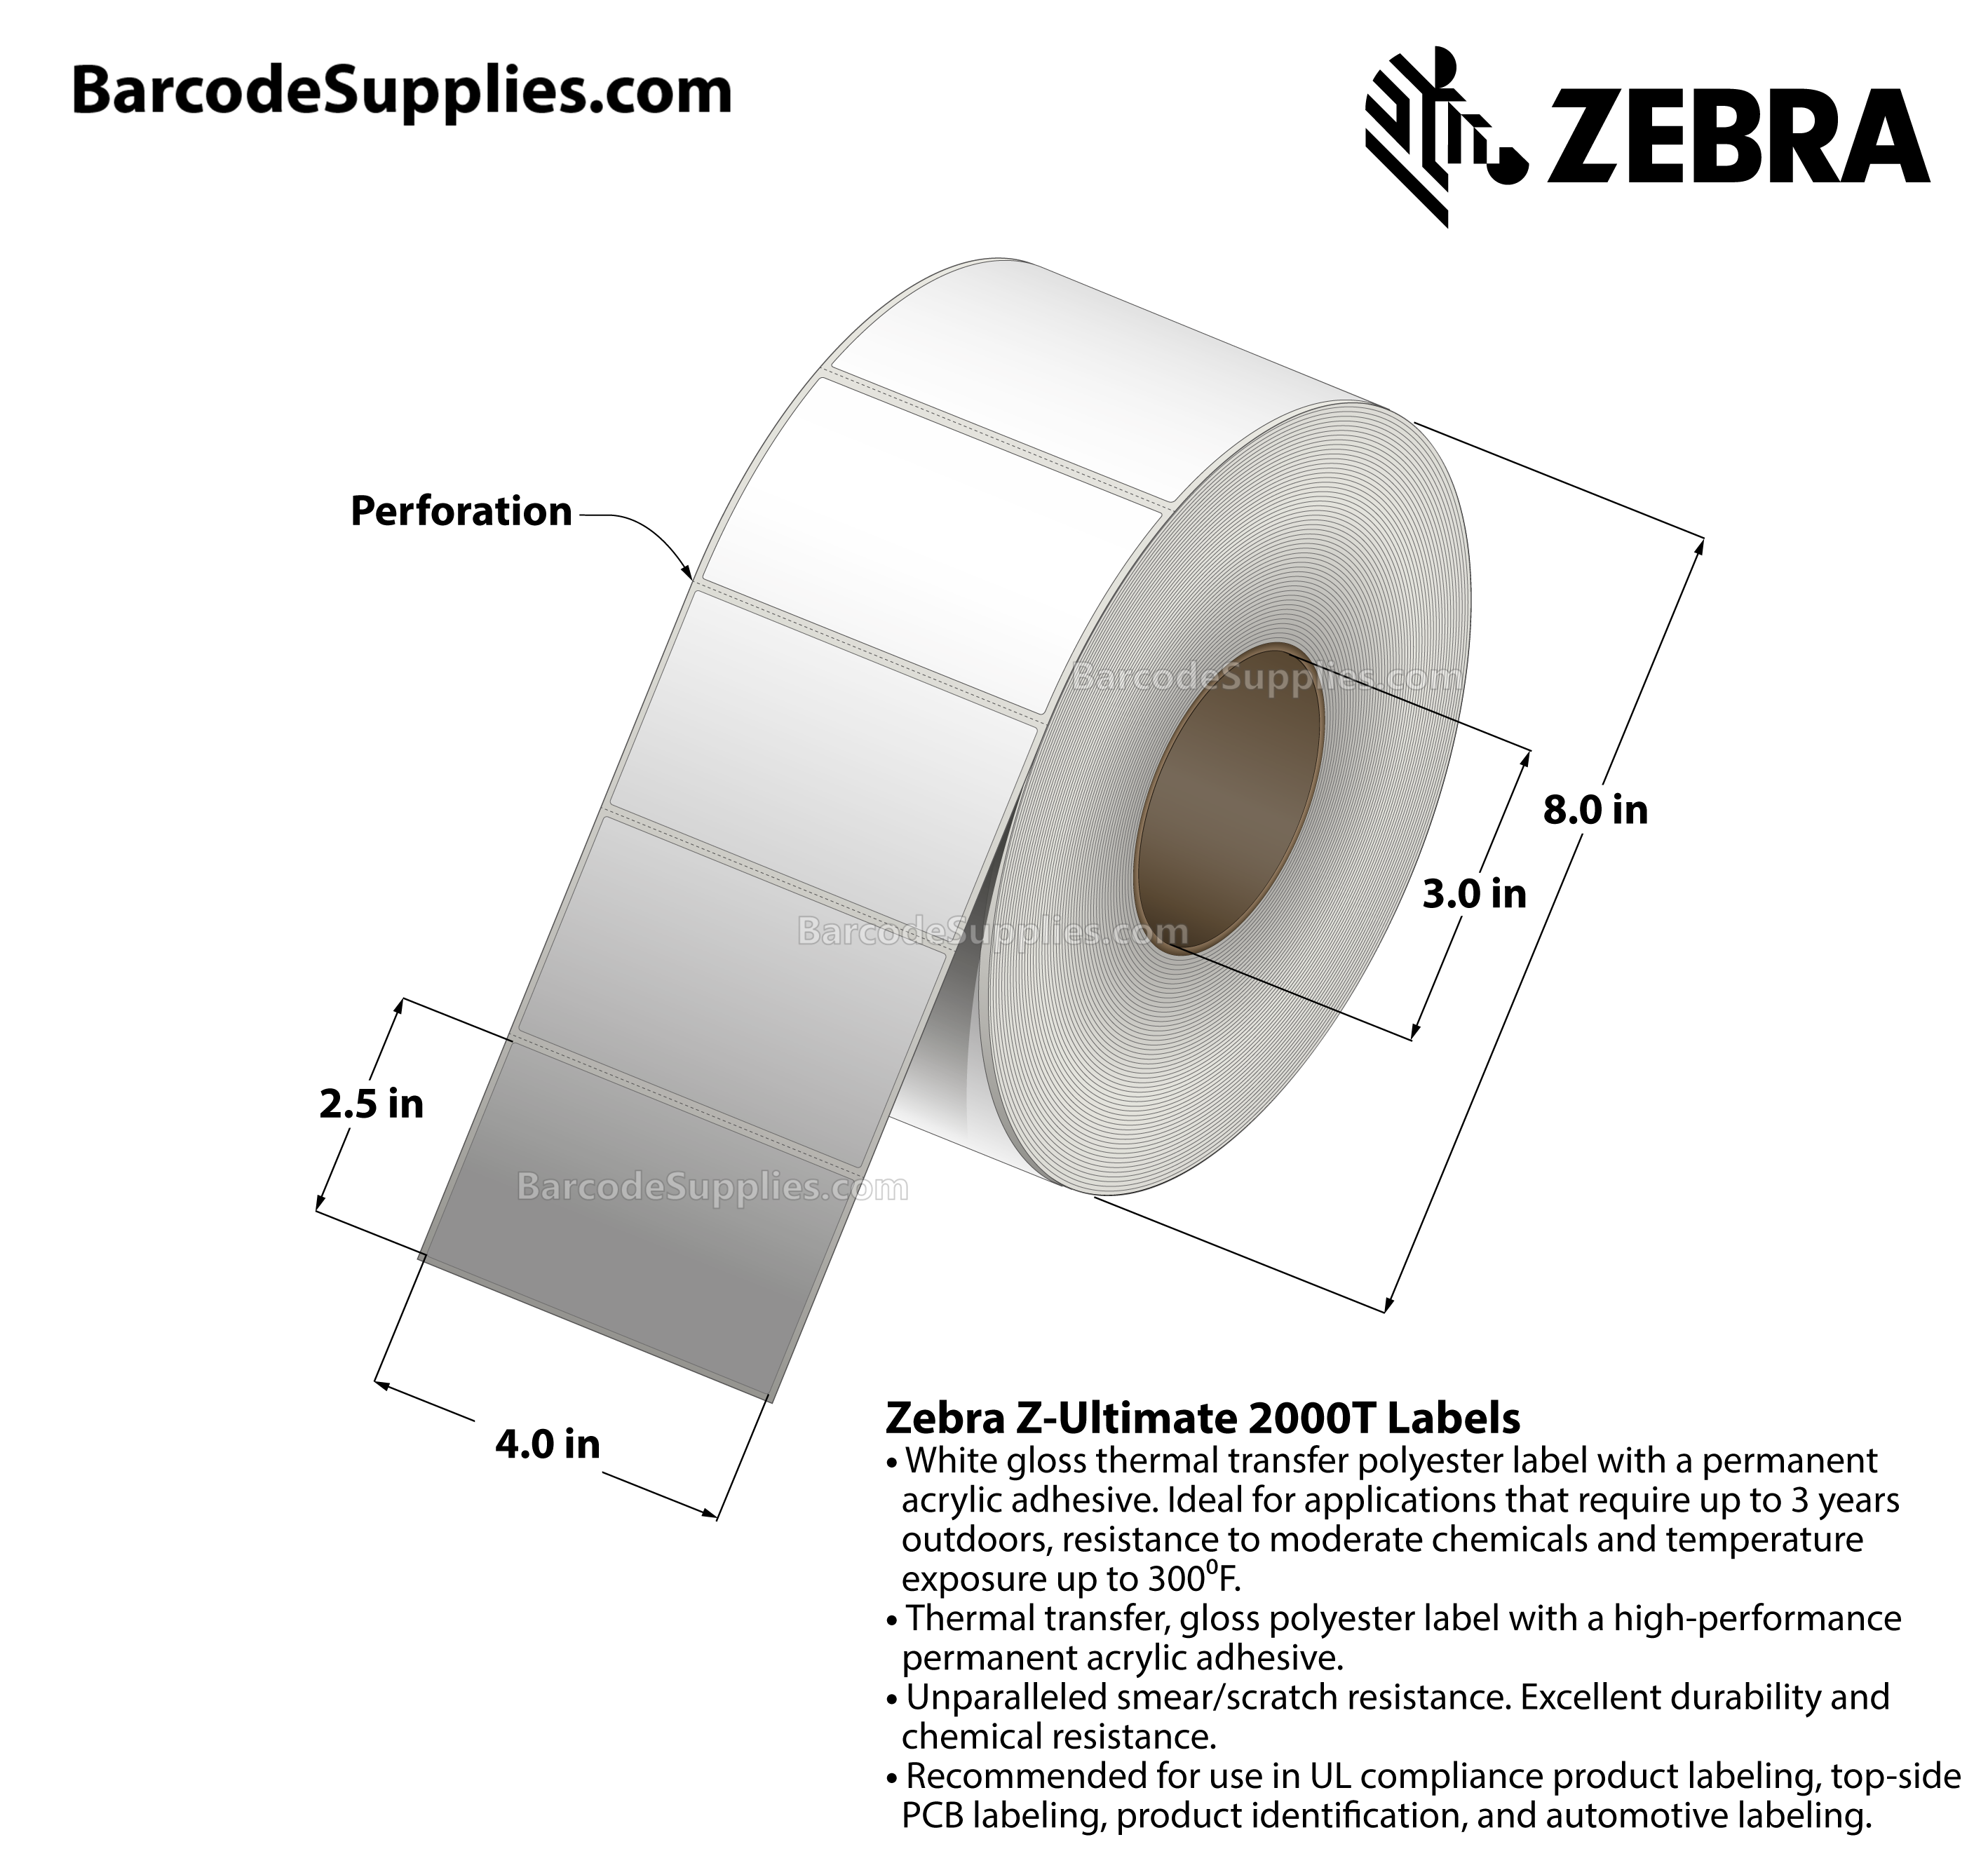 4 x 2.5 Thermal Transfer White Z-Ultimate 2000T Labels With Permanent Adhesive - Perforated - 2240 Labels Per Roll - Carton Of 4 Rolls - 8960 Labels Total - MPN: 10008516